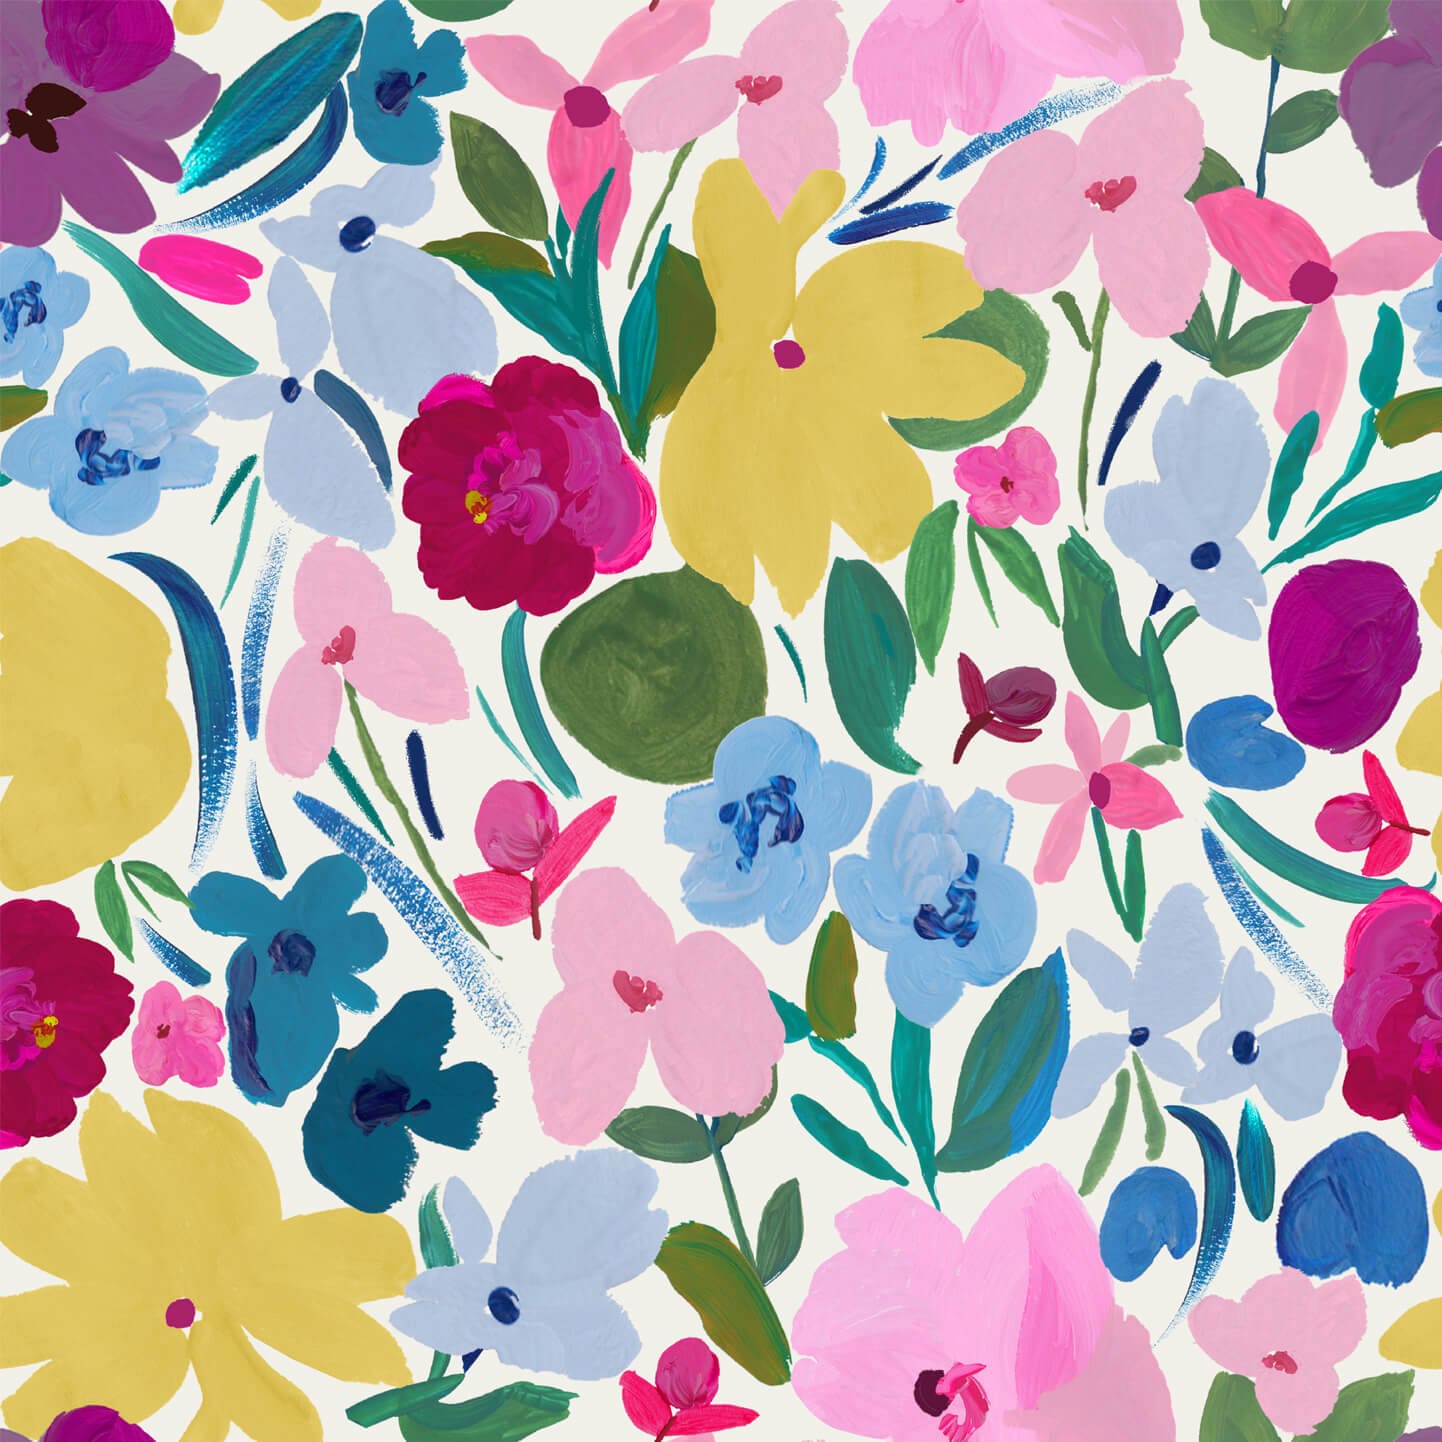 Wallpaper of large flowers in yellow, pink, blue and fuchsia with green stalks and leaves.